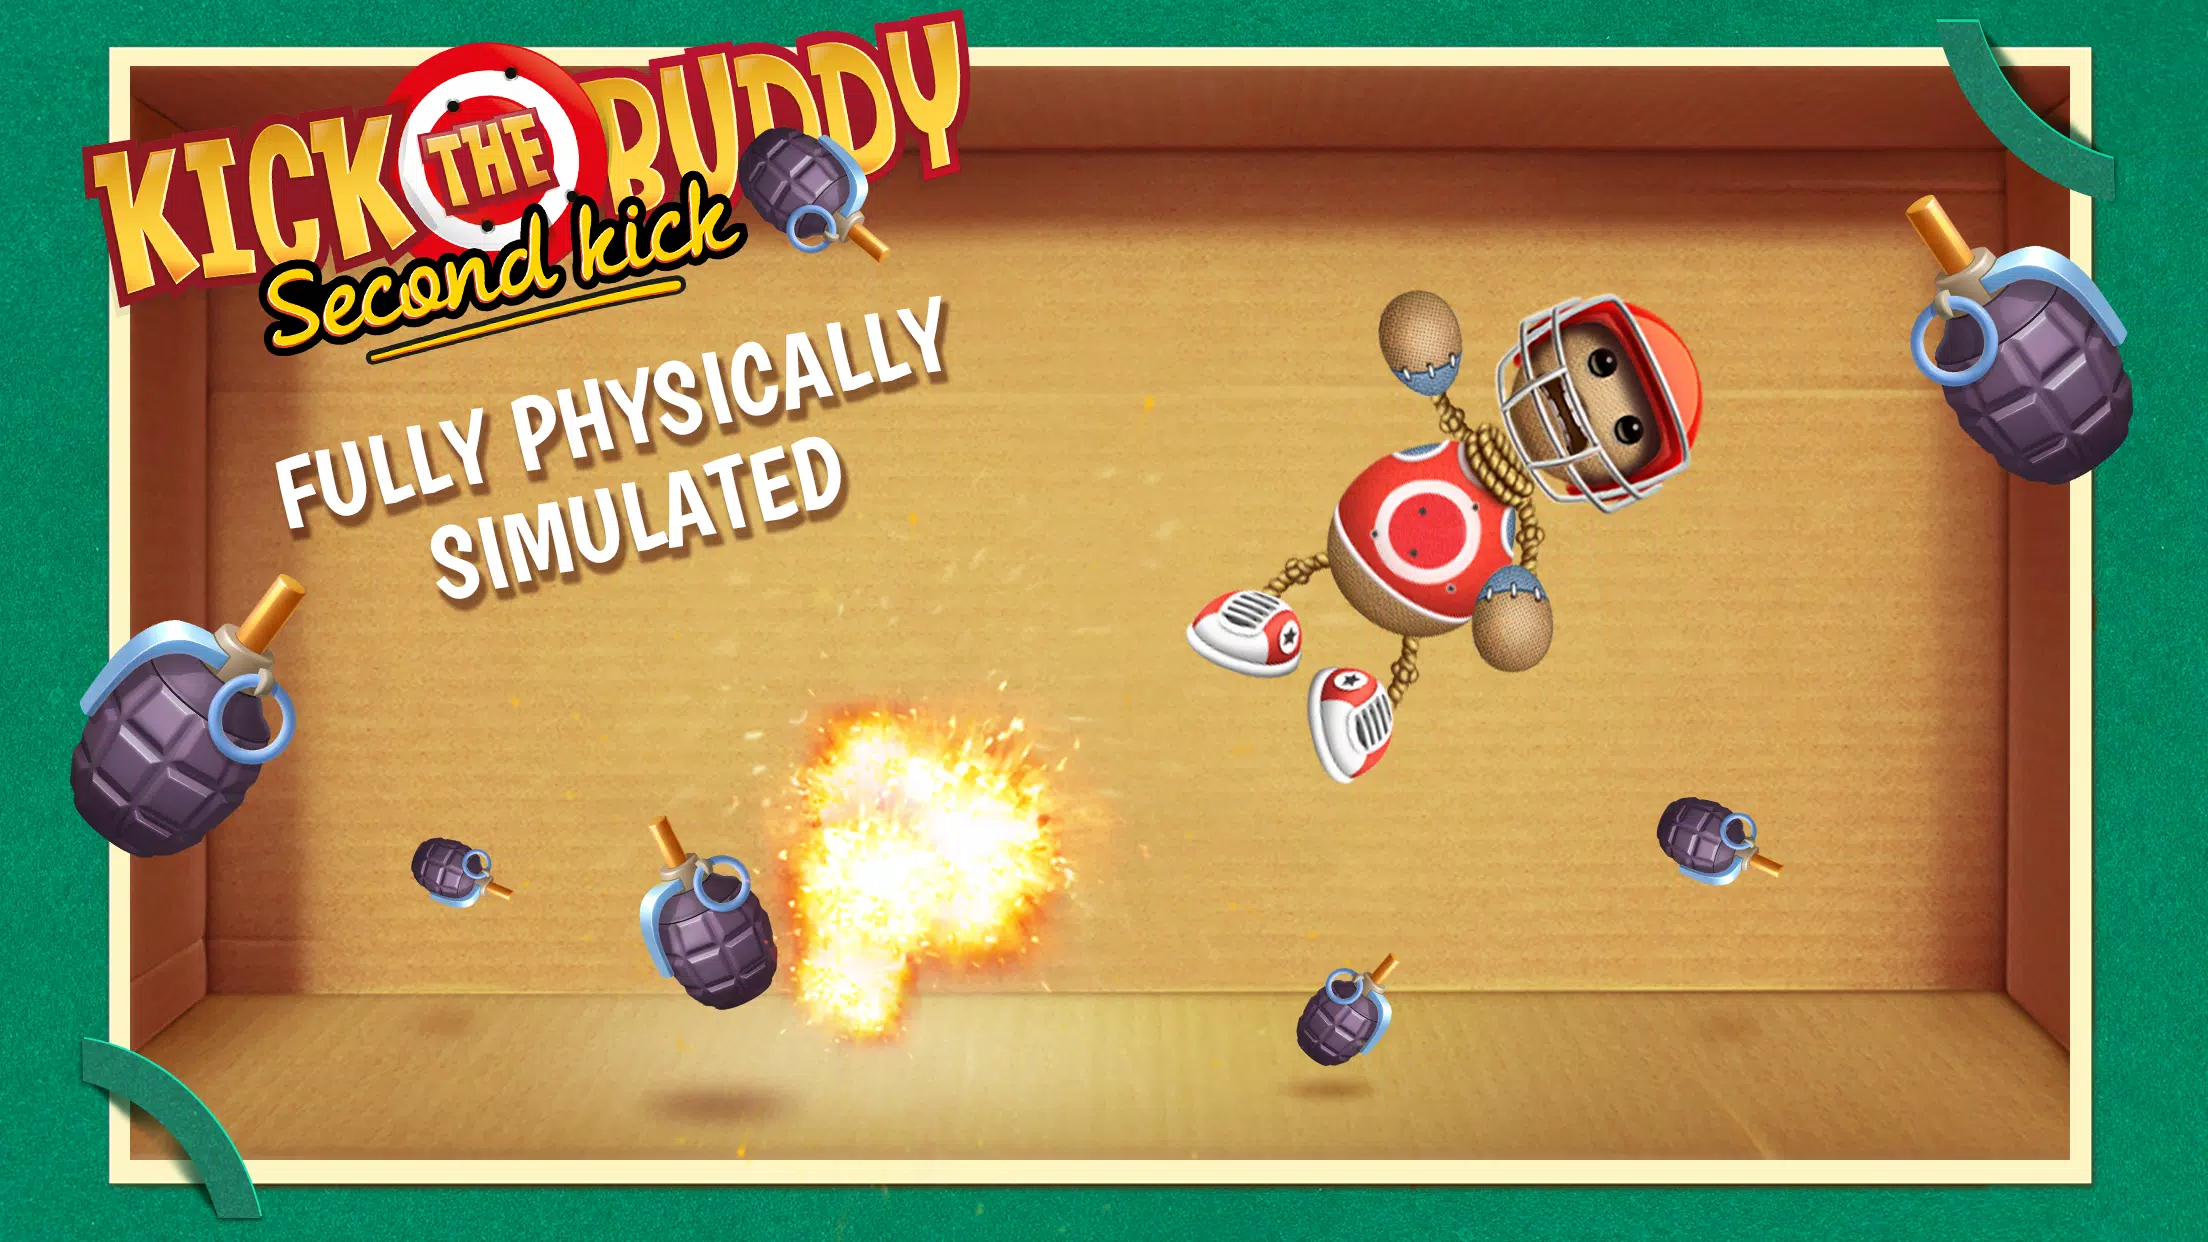 Kick the Buddy: Second Kick - Tips to Play the Game